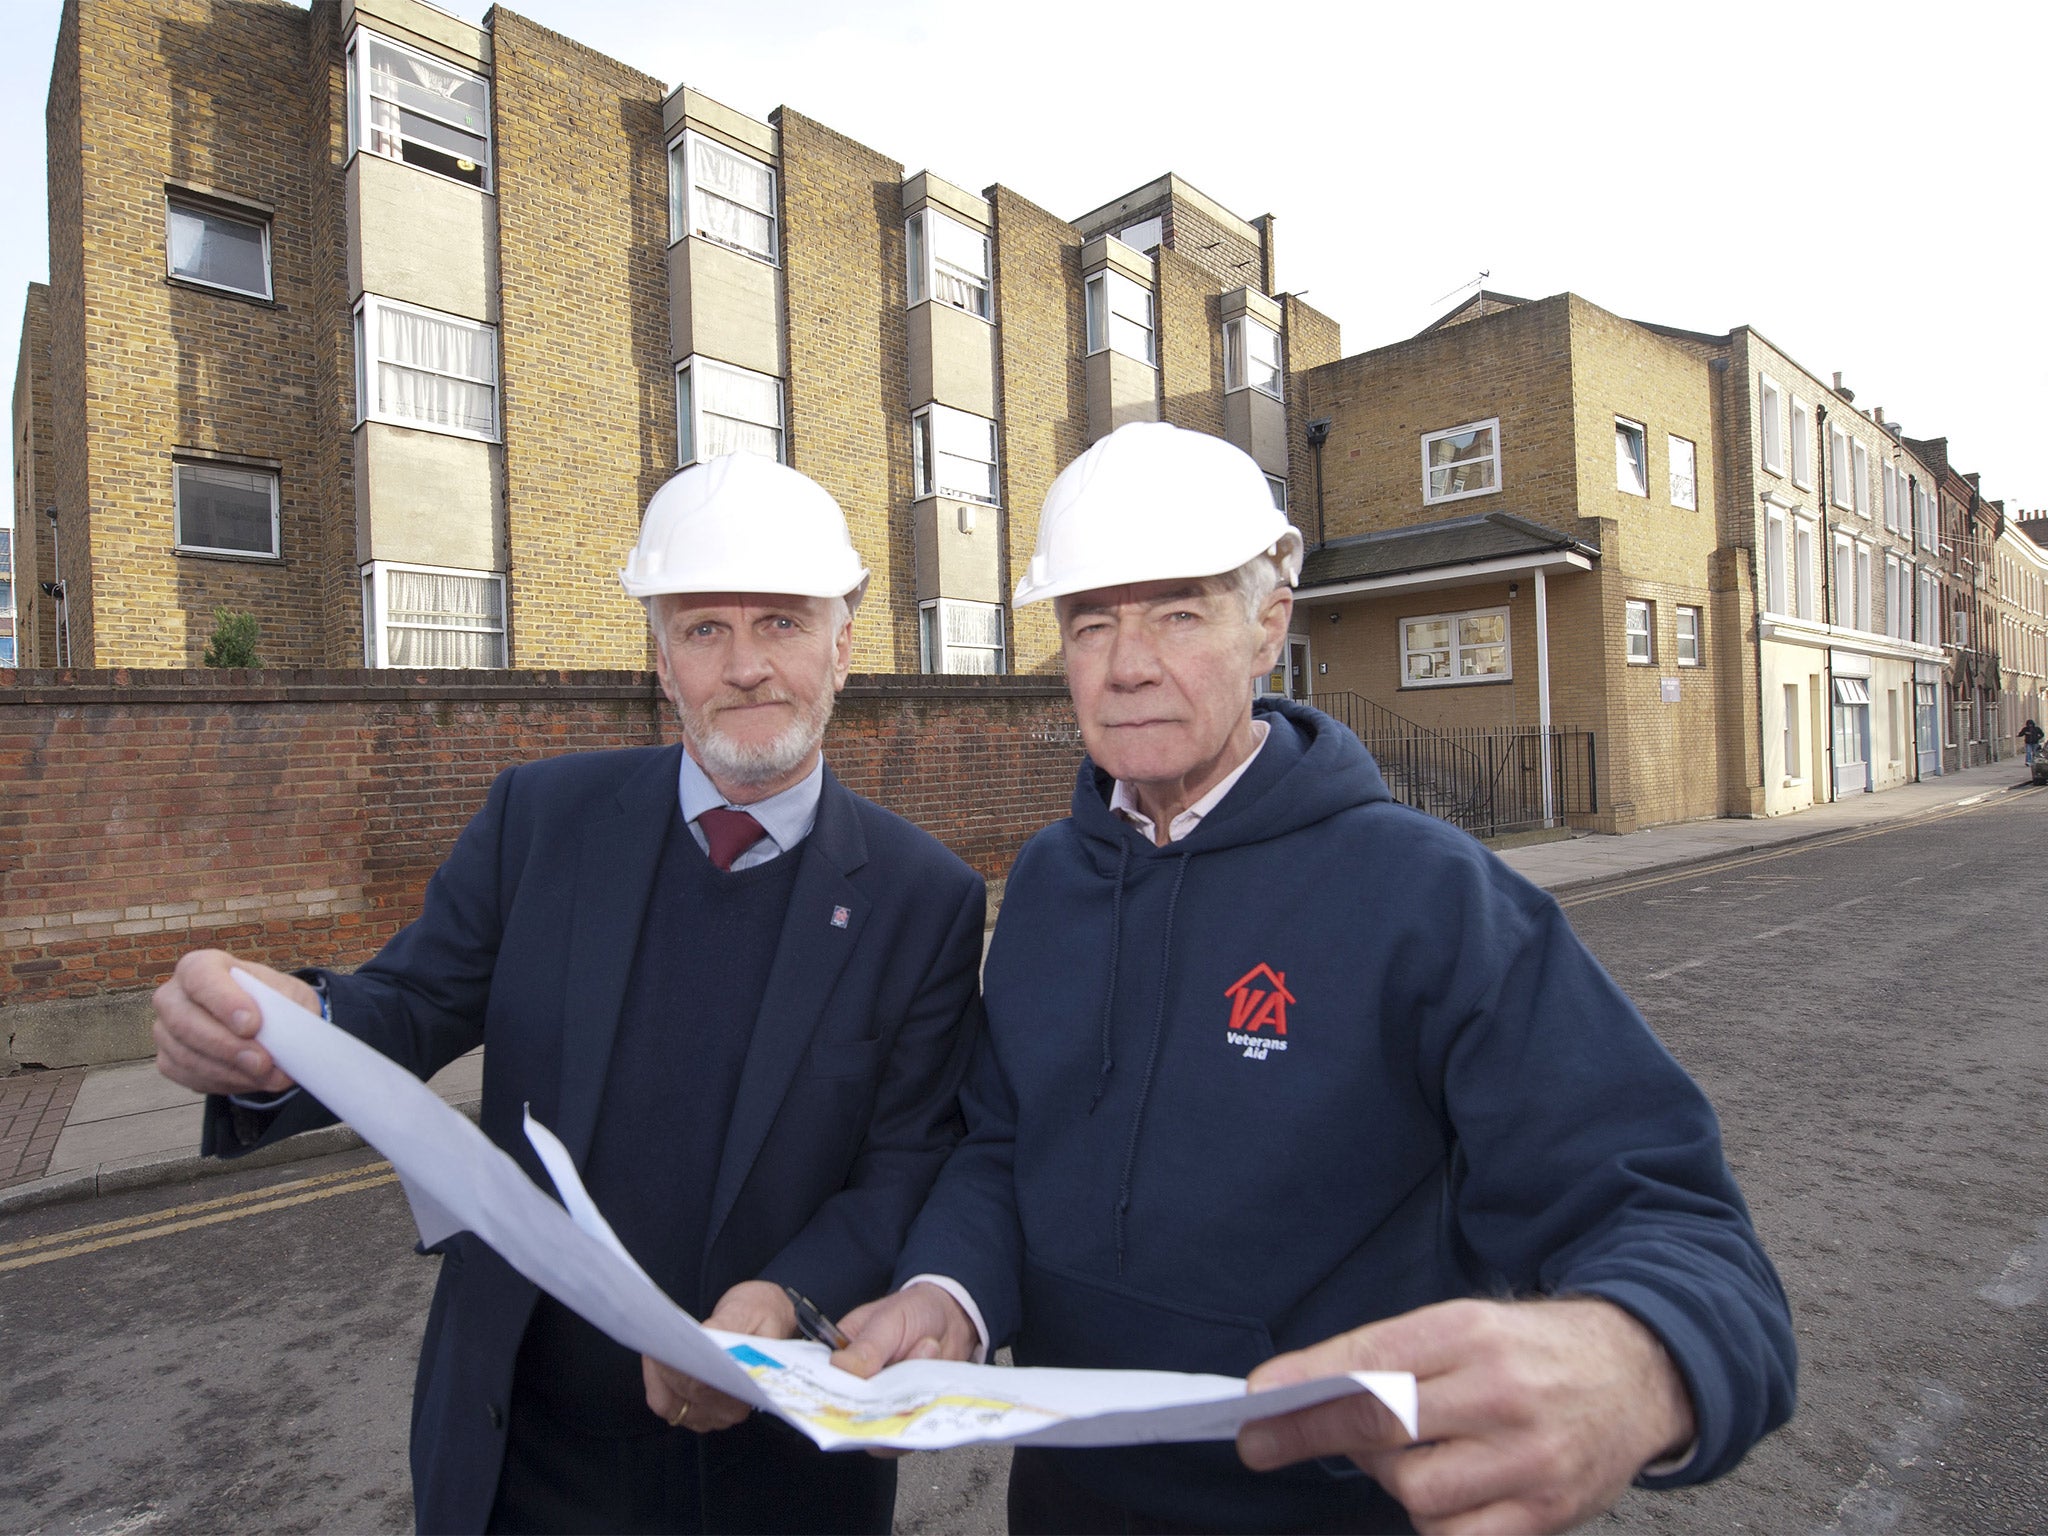 Colonel Geoffrey Cardozo, (right) and Dave Buckley discuss the plans for the home’s redevelopment